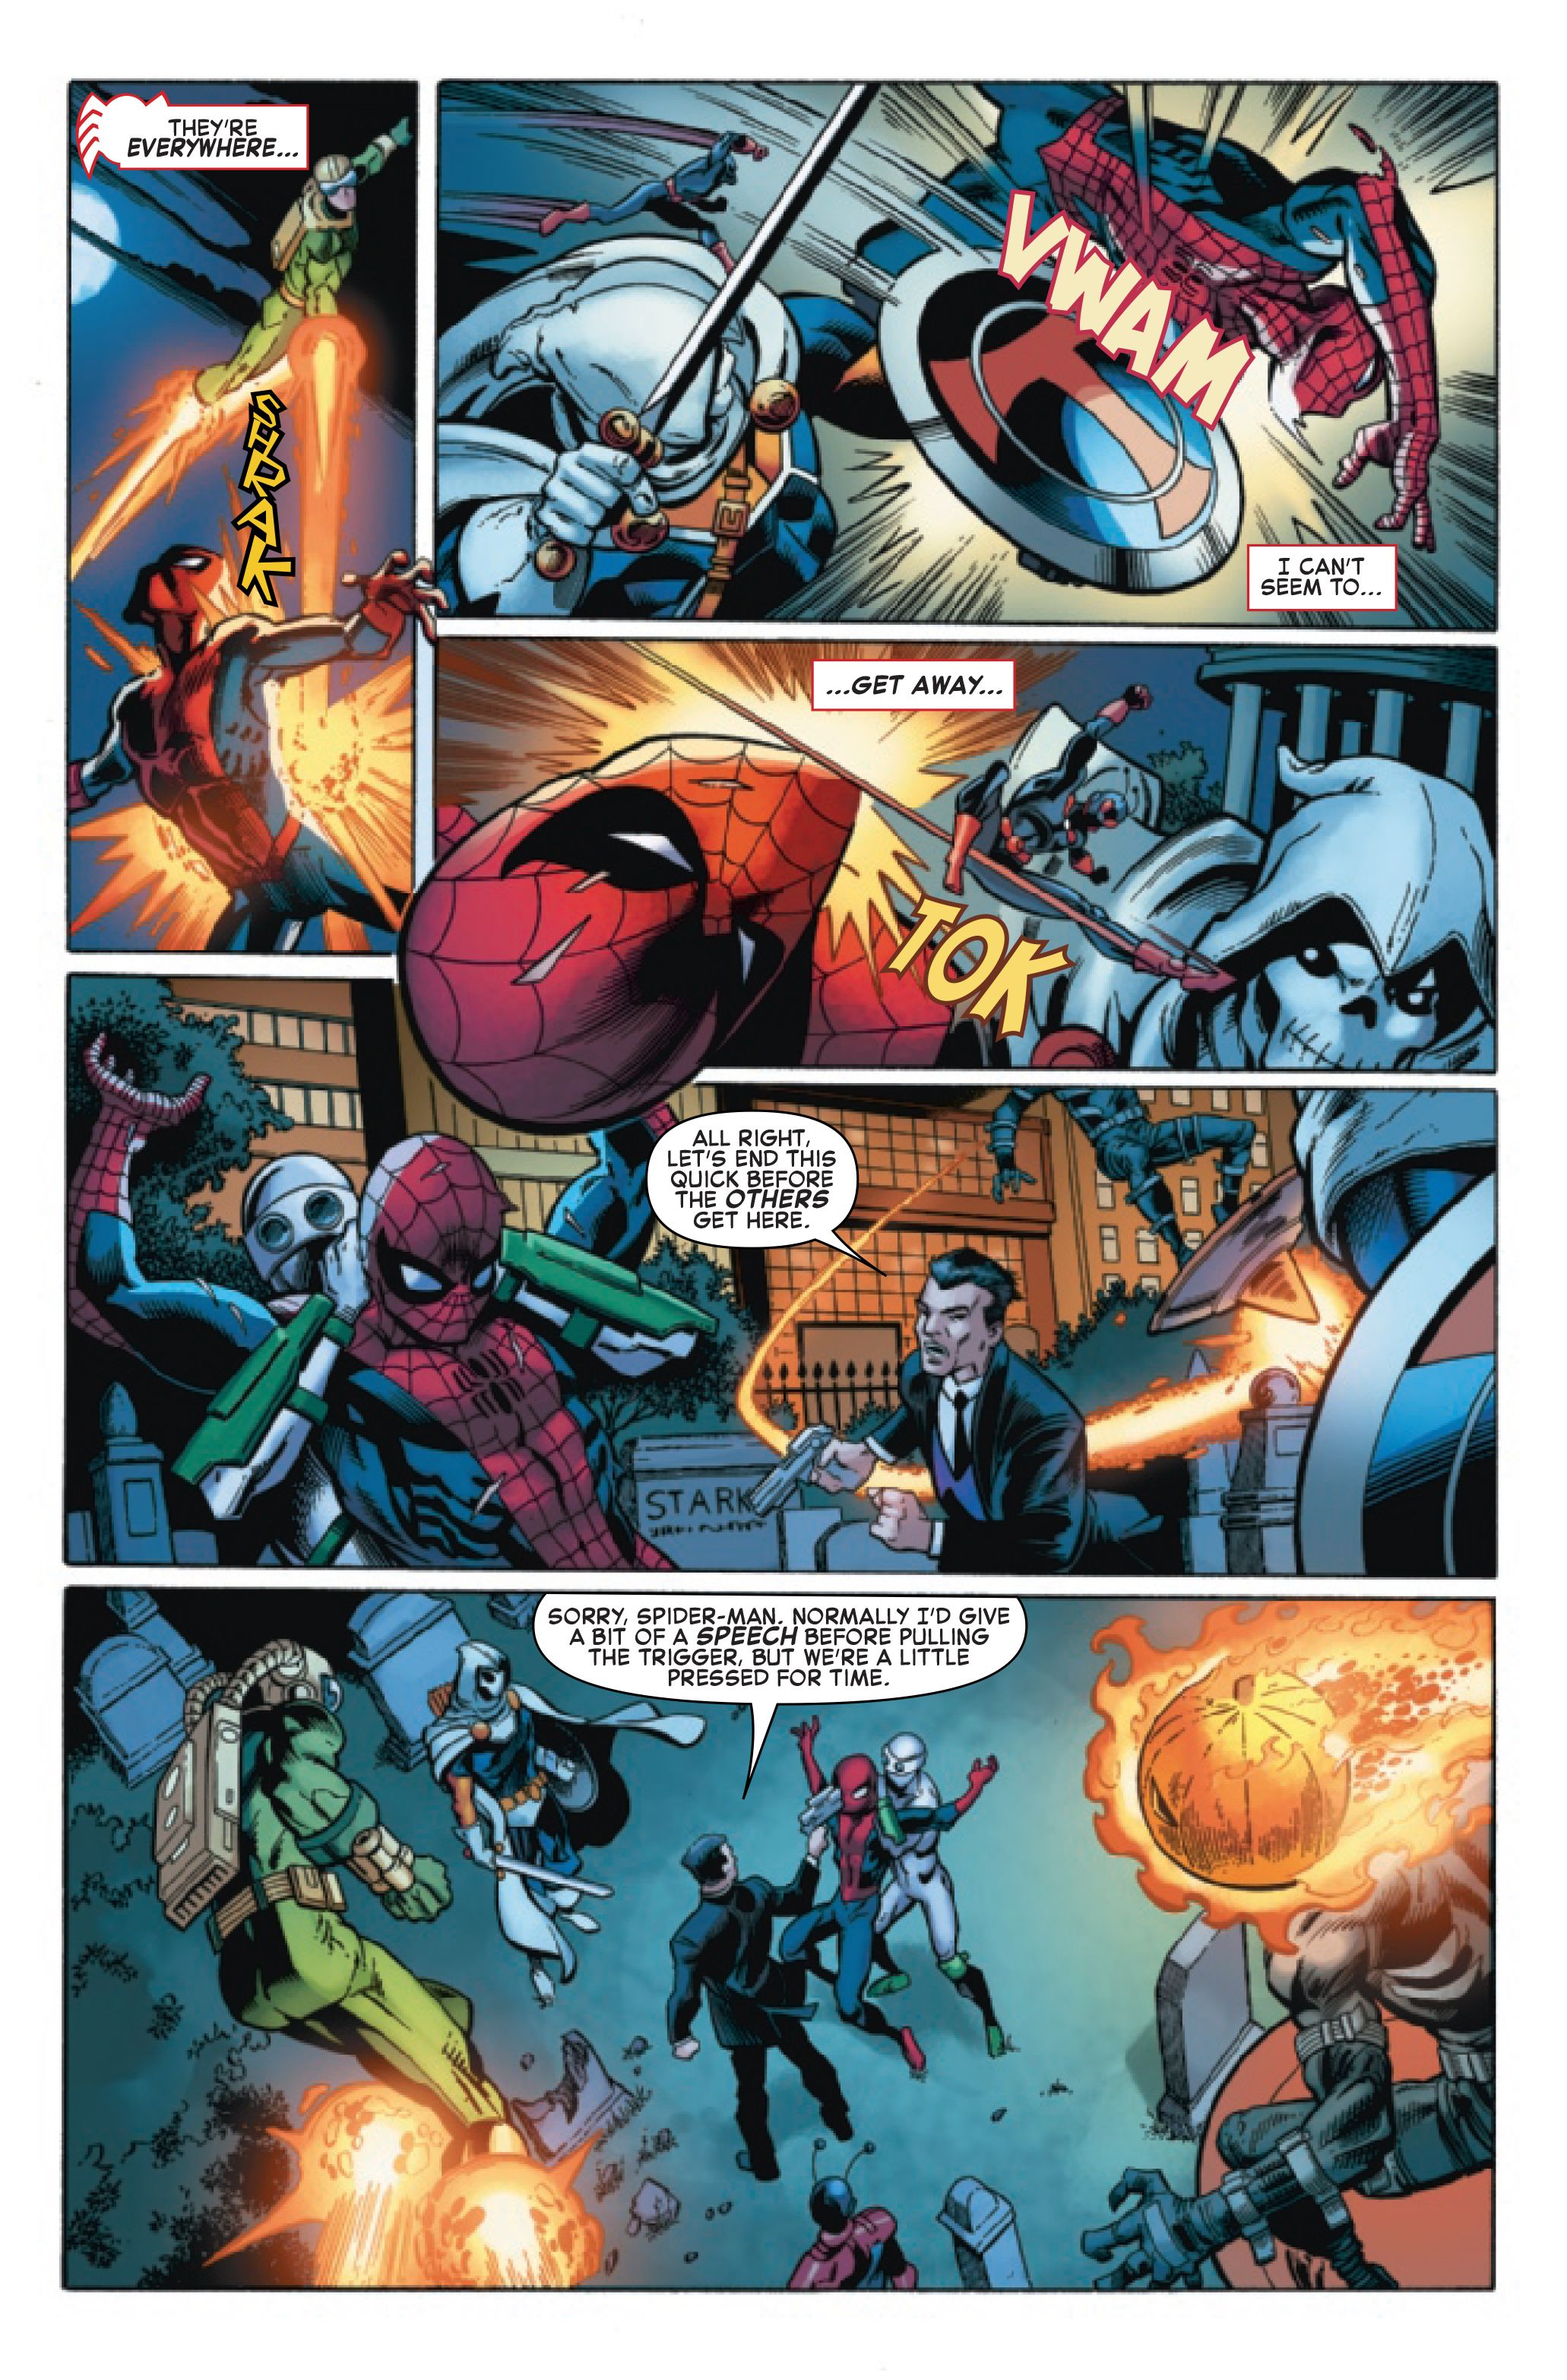 Page 5 of Marvel Comics' Sinister War #2, by Nick Spencer, Ed Brisson, Mark Bagley, Diogenes Neves, Carlos Gomez, Ze Carlos, Andrew Hennessy, John Dell, Andy Owens, Brian Reber and VC's Joe Caramagna.